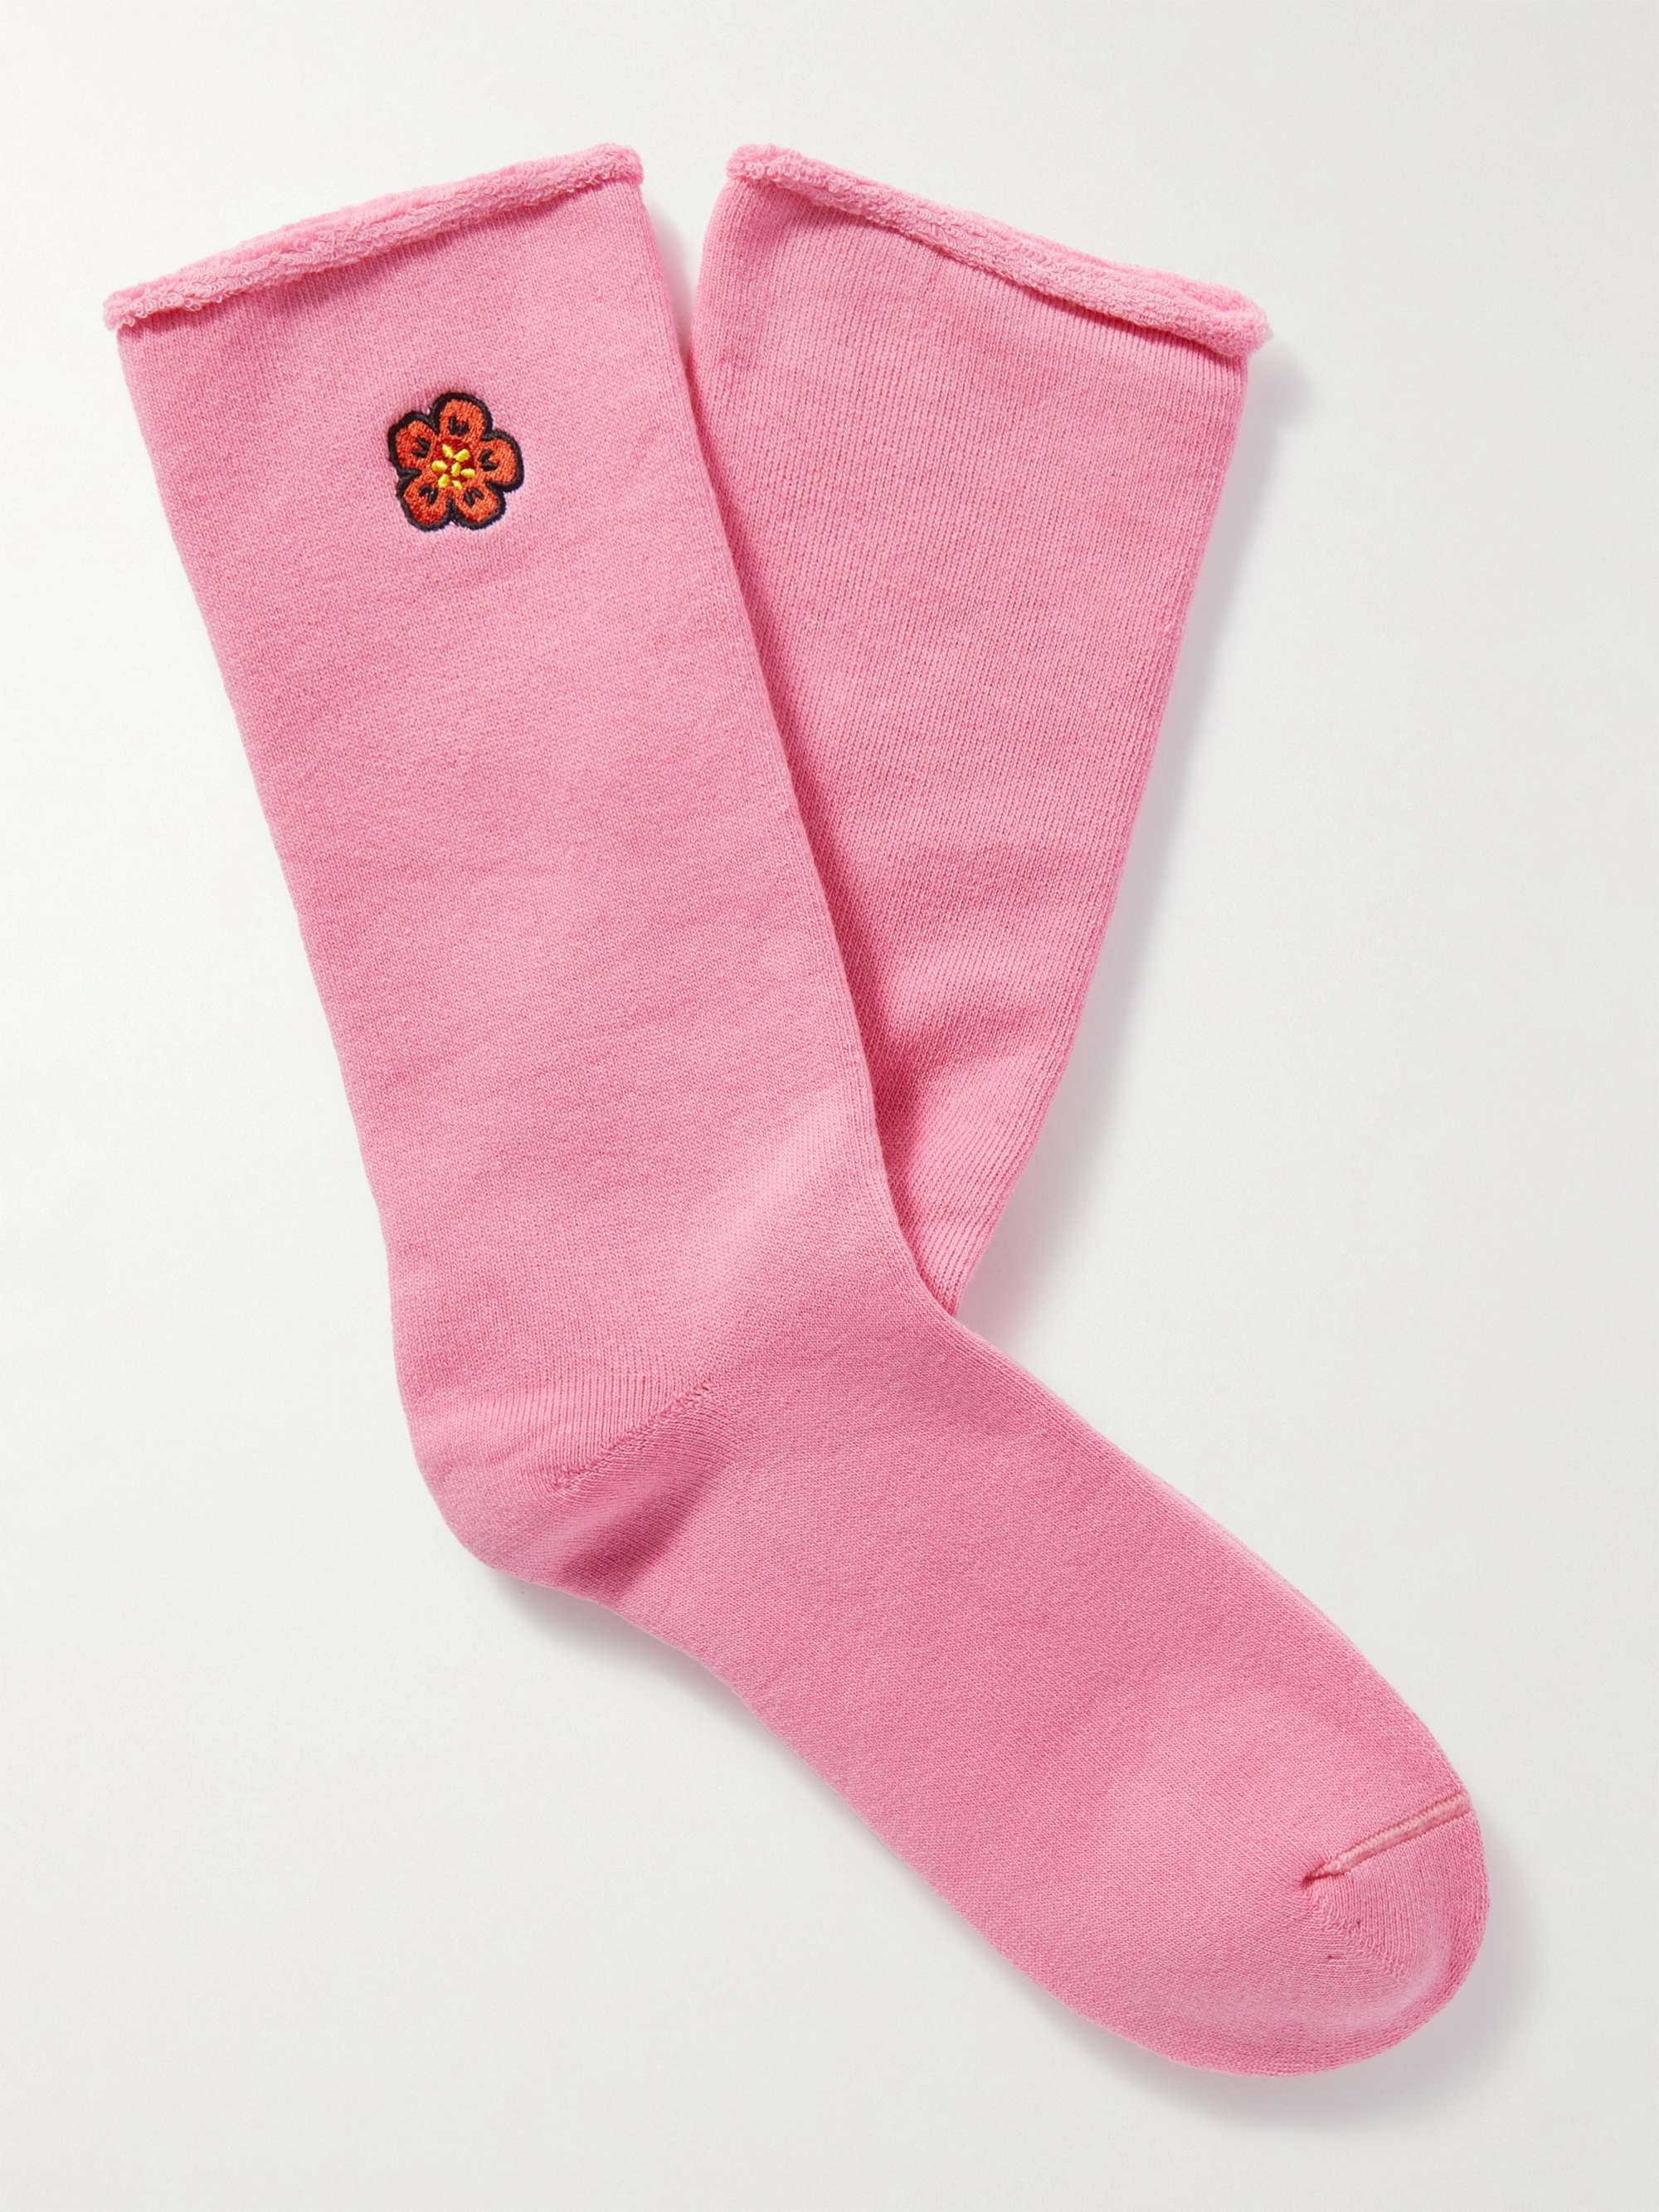 KENZO Embroidered Cotton-Blend Socks